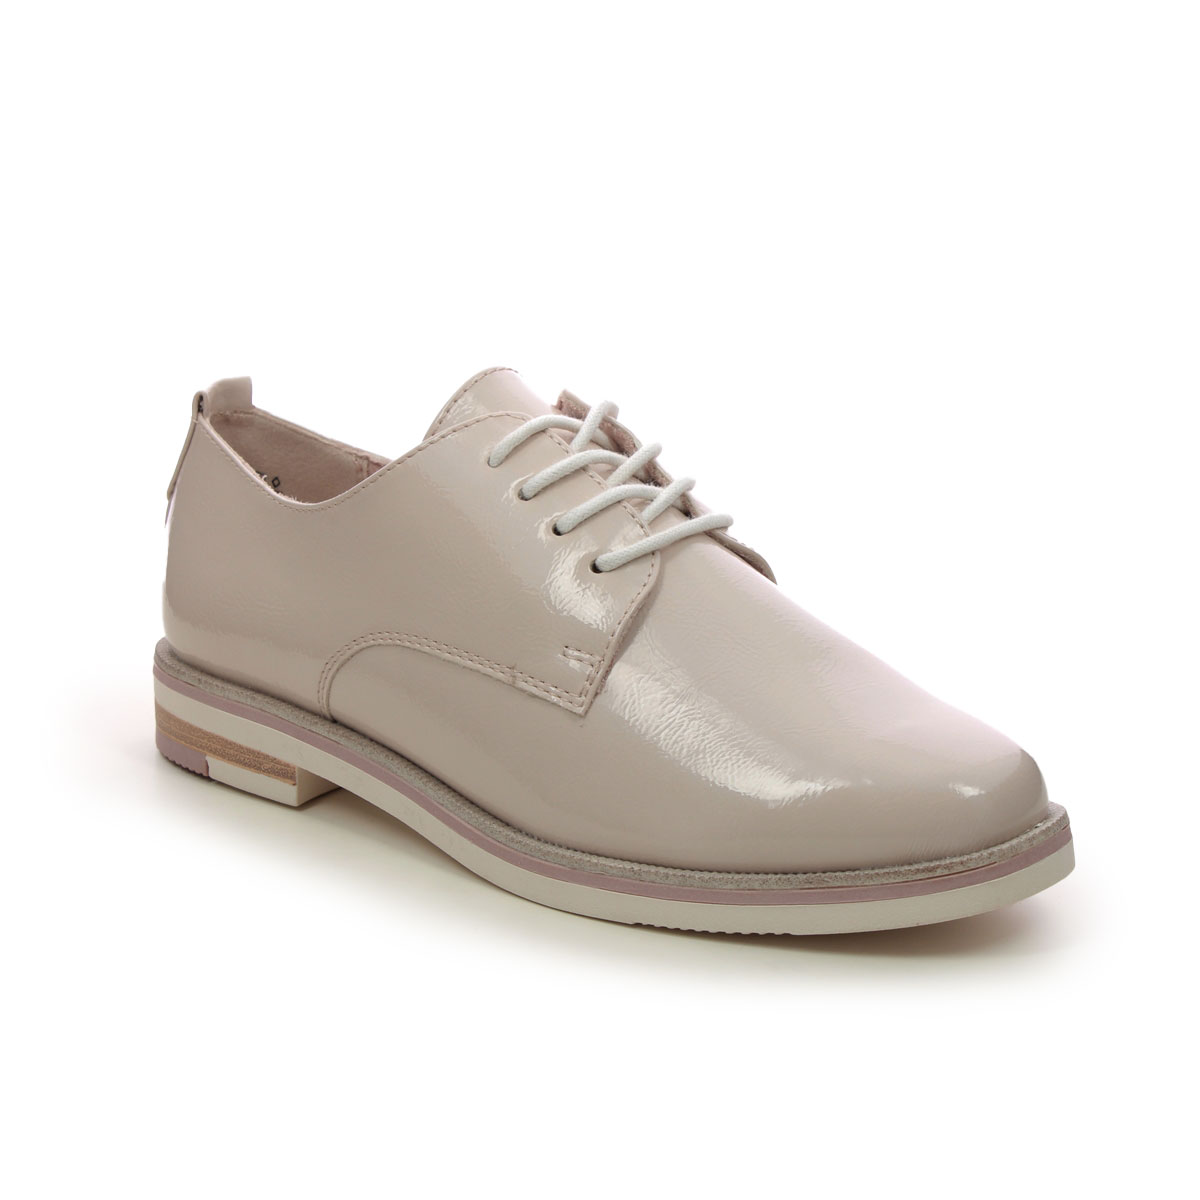 Marco Tozzi Bacone Nude Patent Womens Brogues 23200-41-522 in a Plain Man-made in Size 41